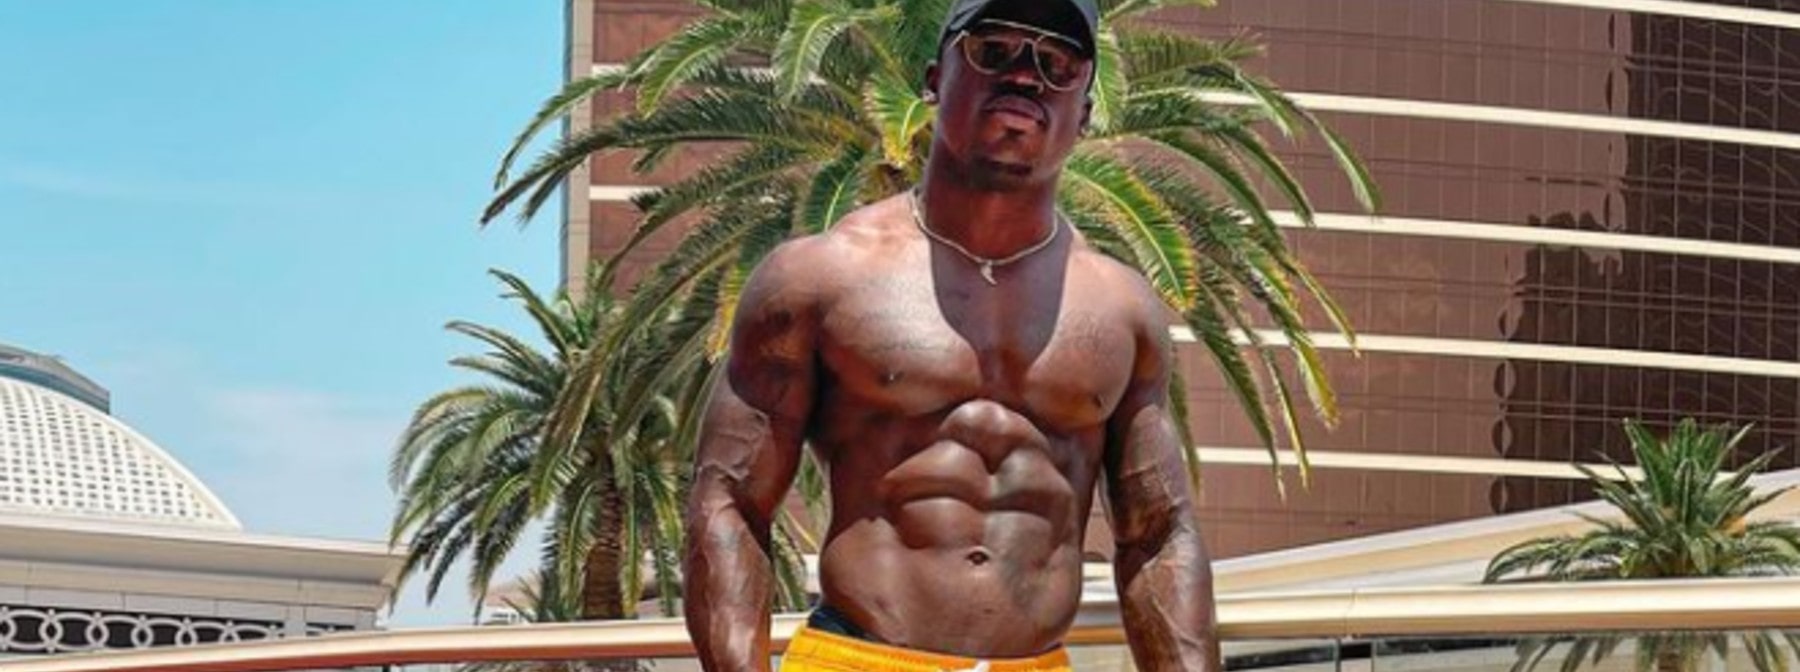 Six Pack Attack Workout With Darien “That Ab Guy” Johnson